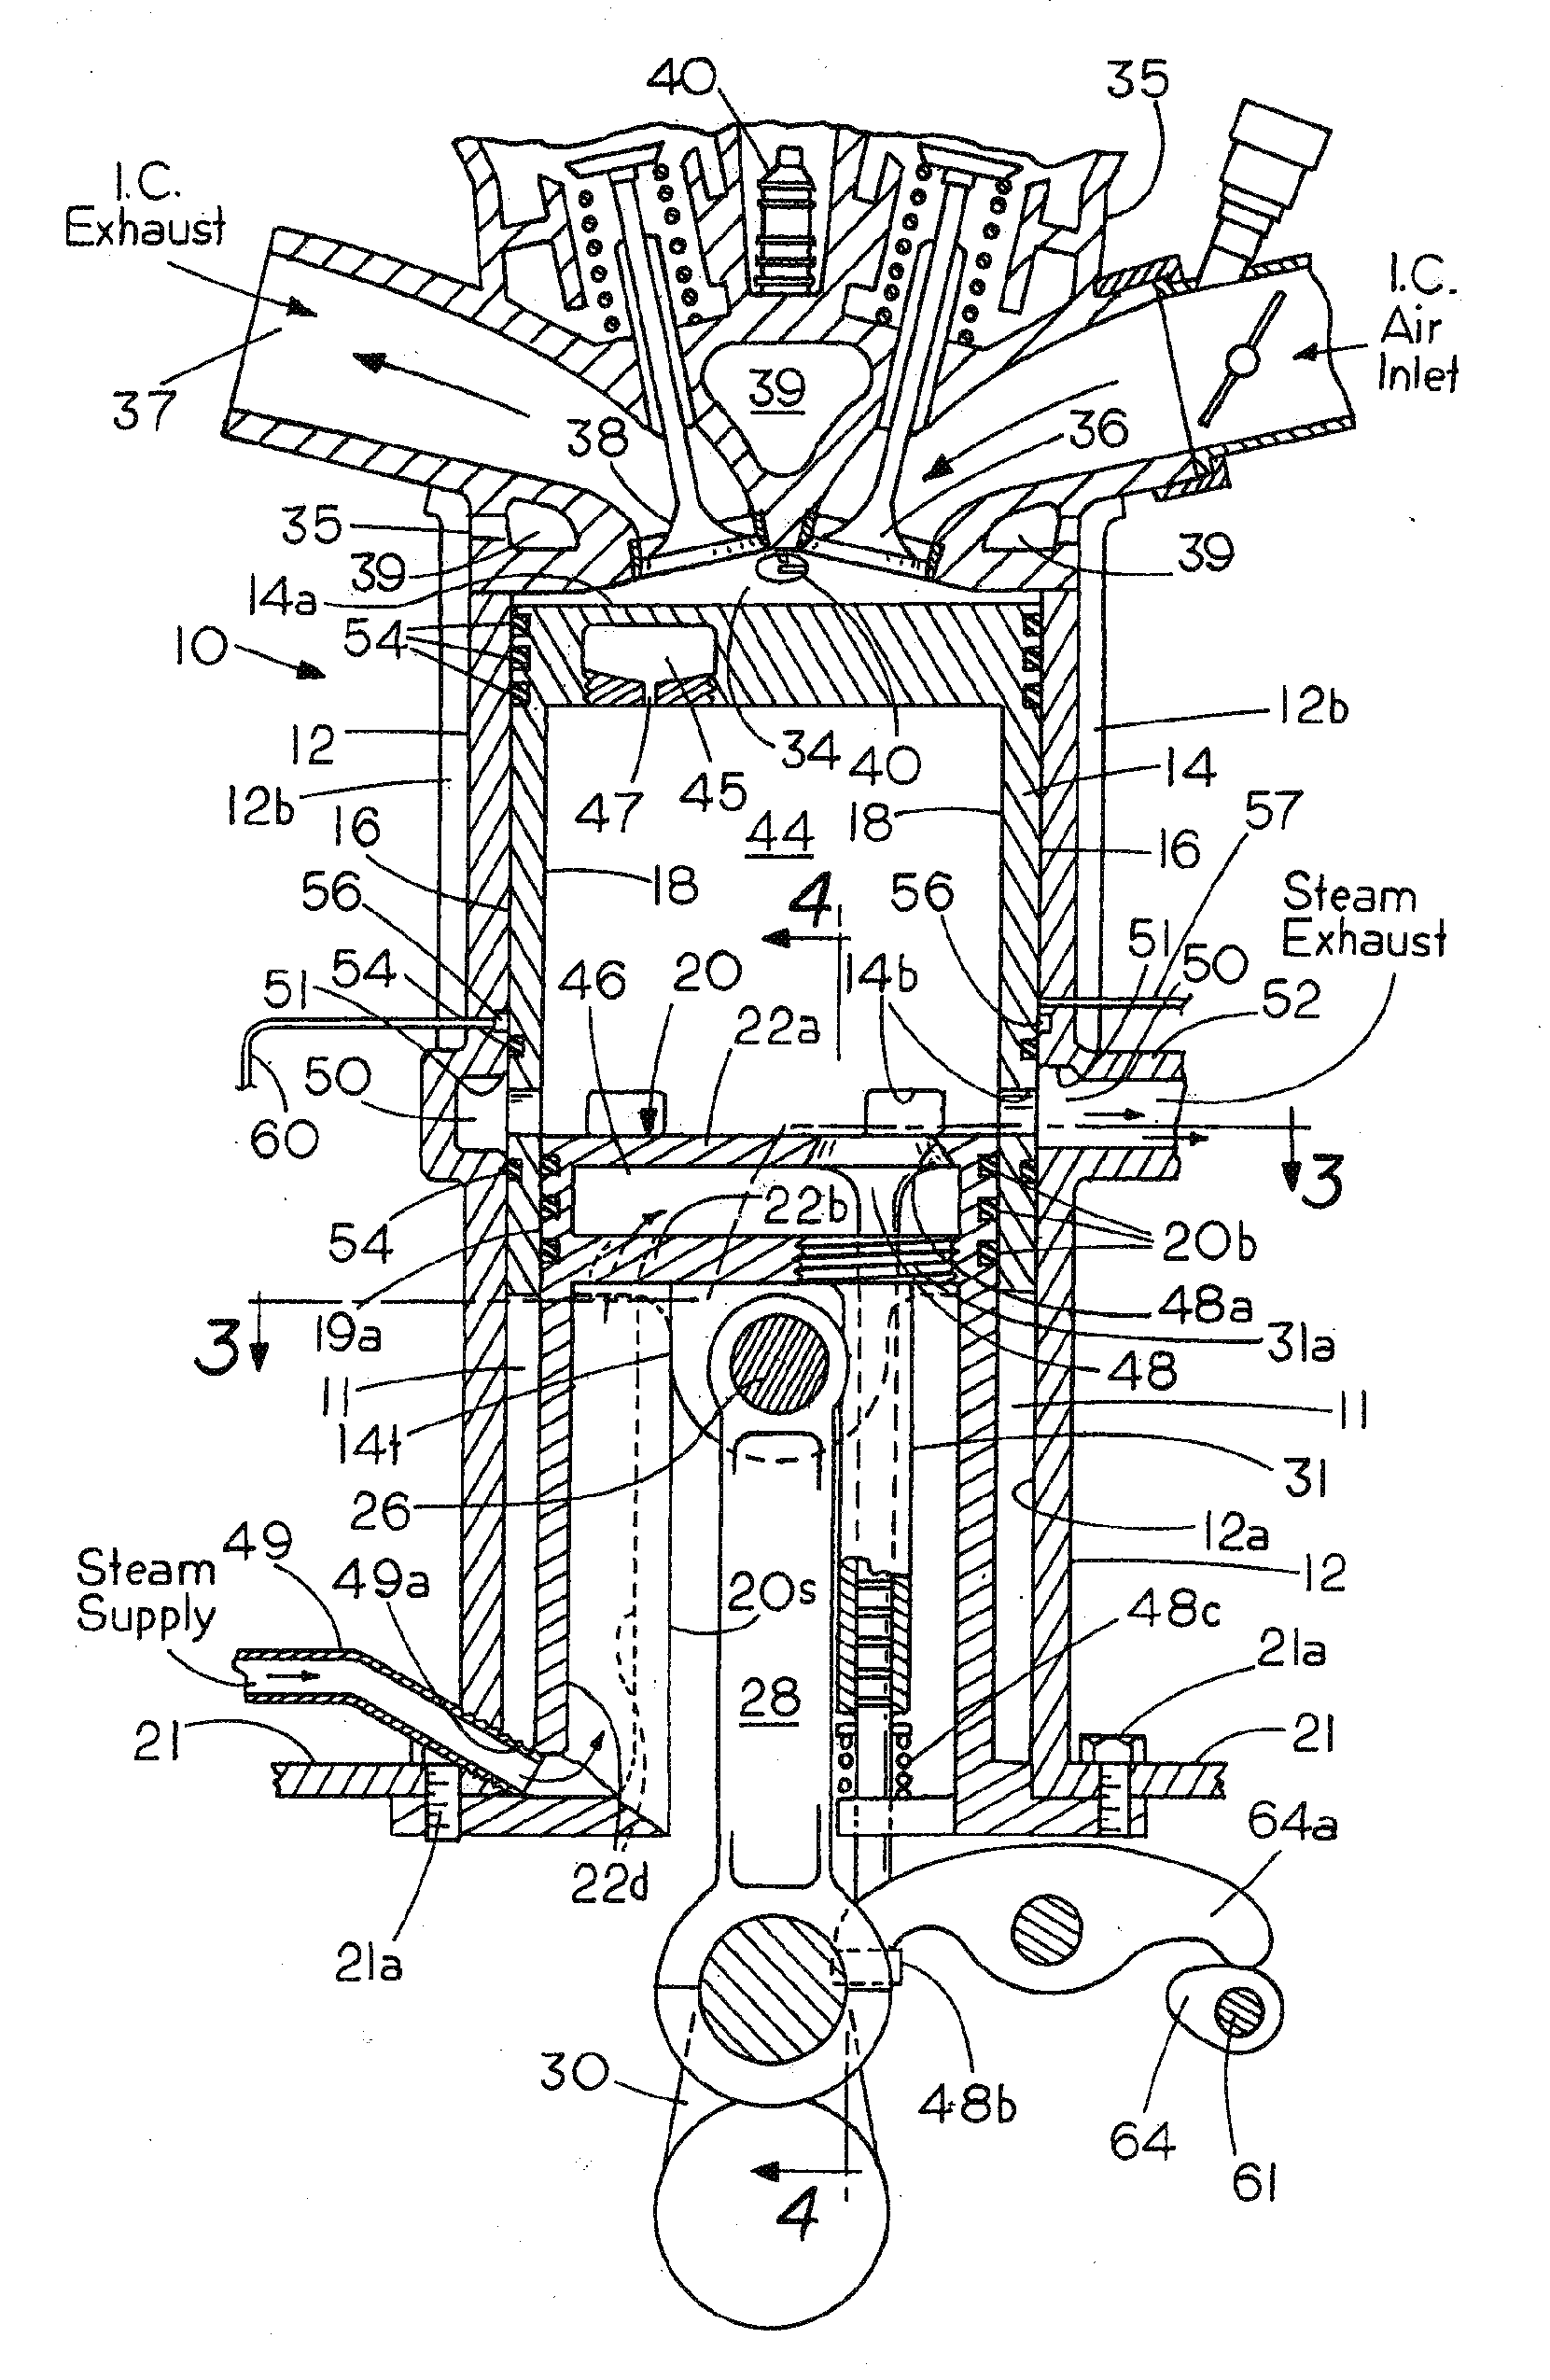 High Efficiency Multicycle Internal Combustion Engine With Waste Heat Recovery